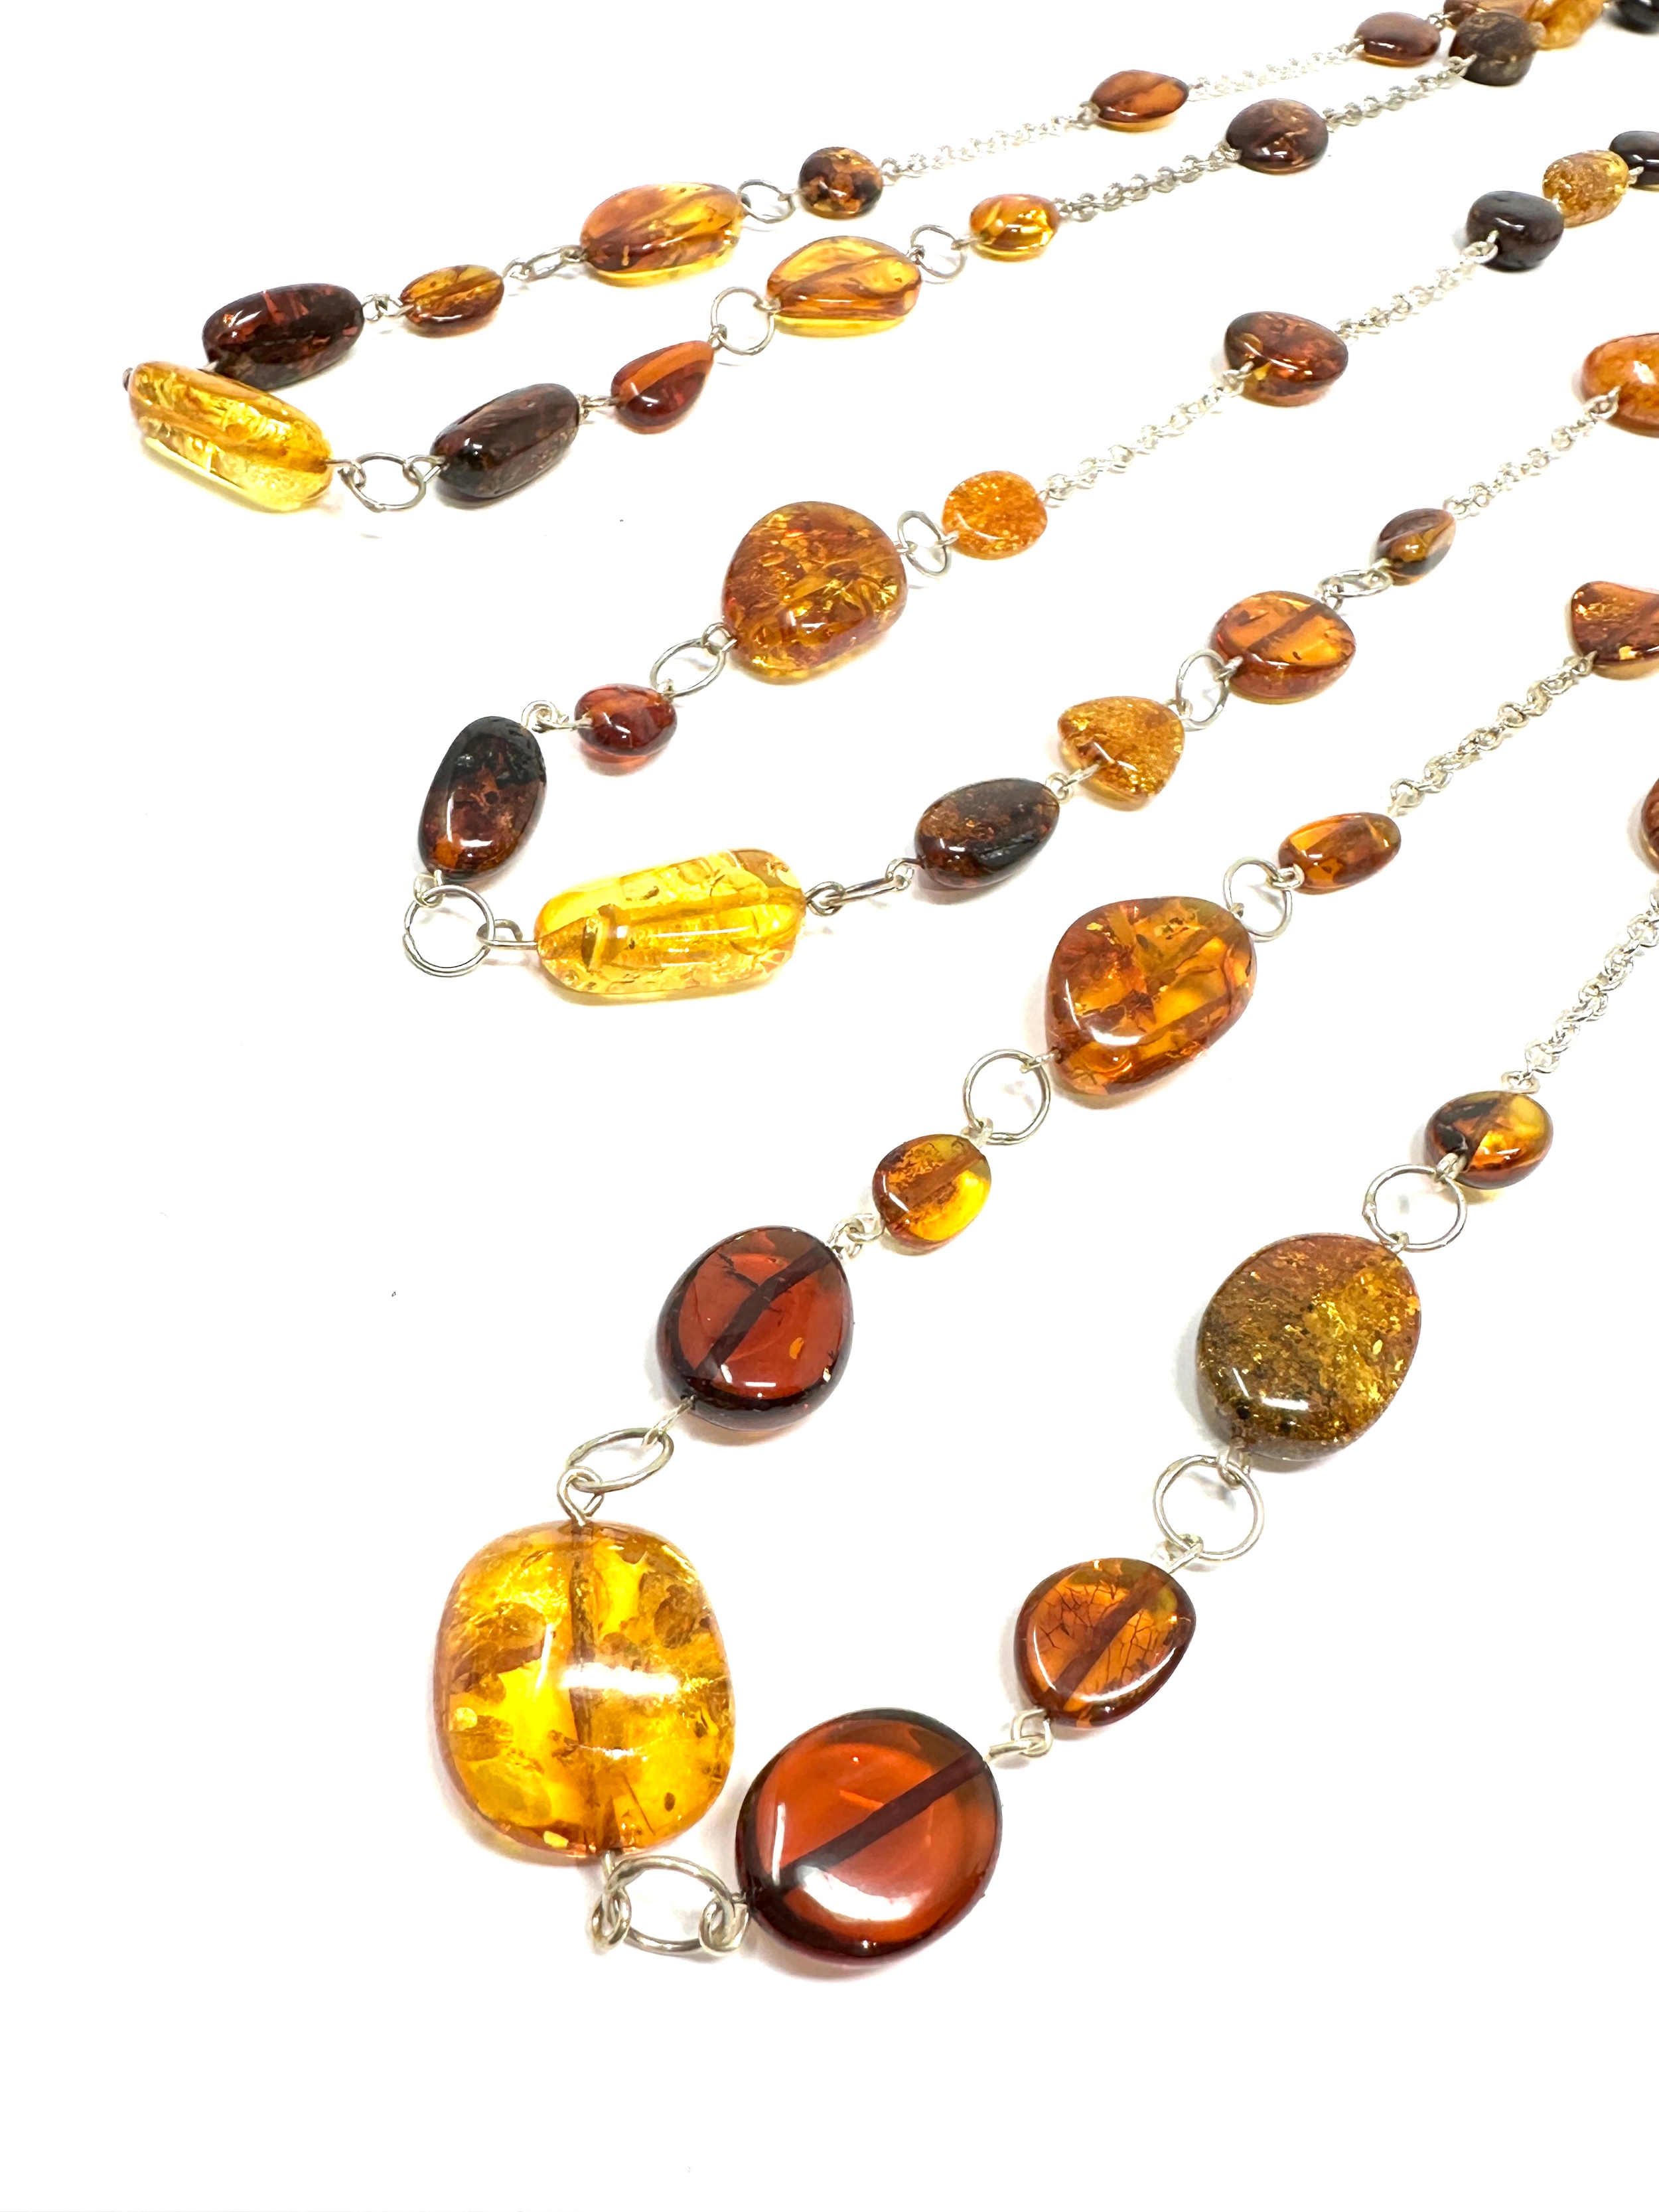 3 silver amber necklaces weight 45g - Image 2 of 3